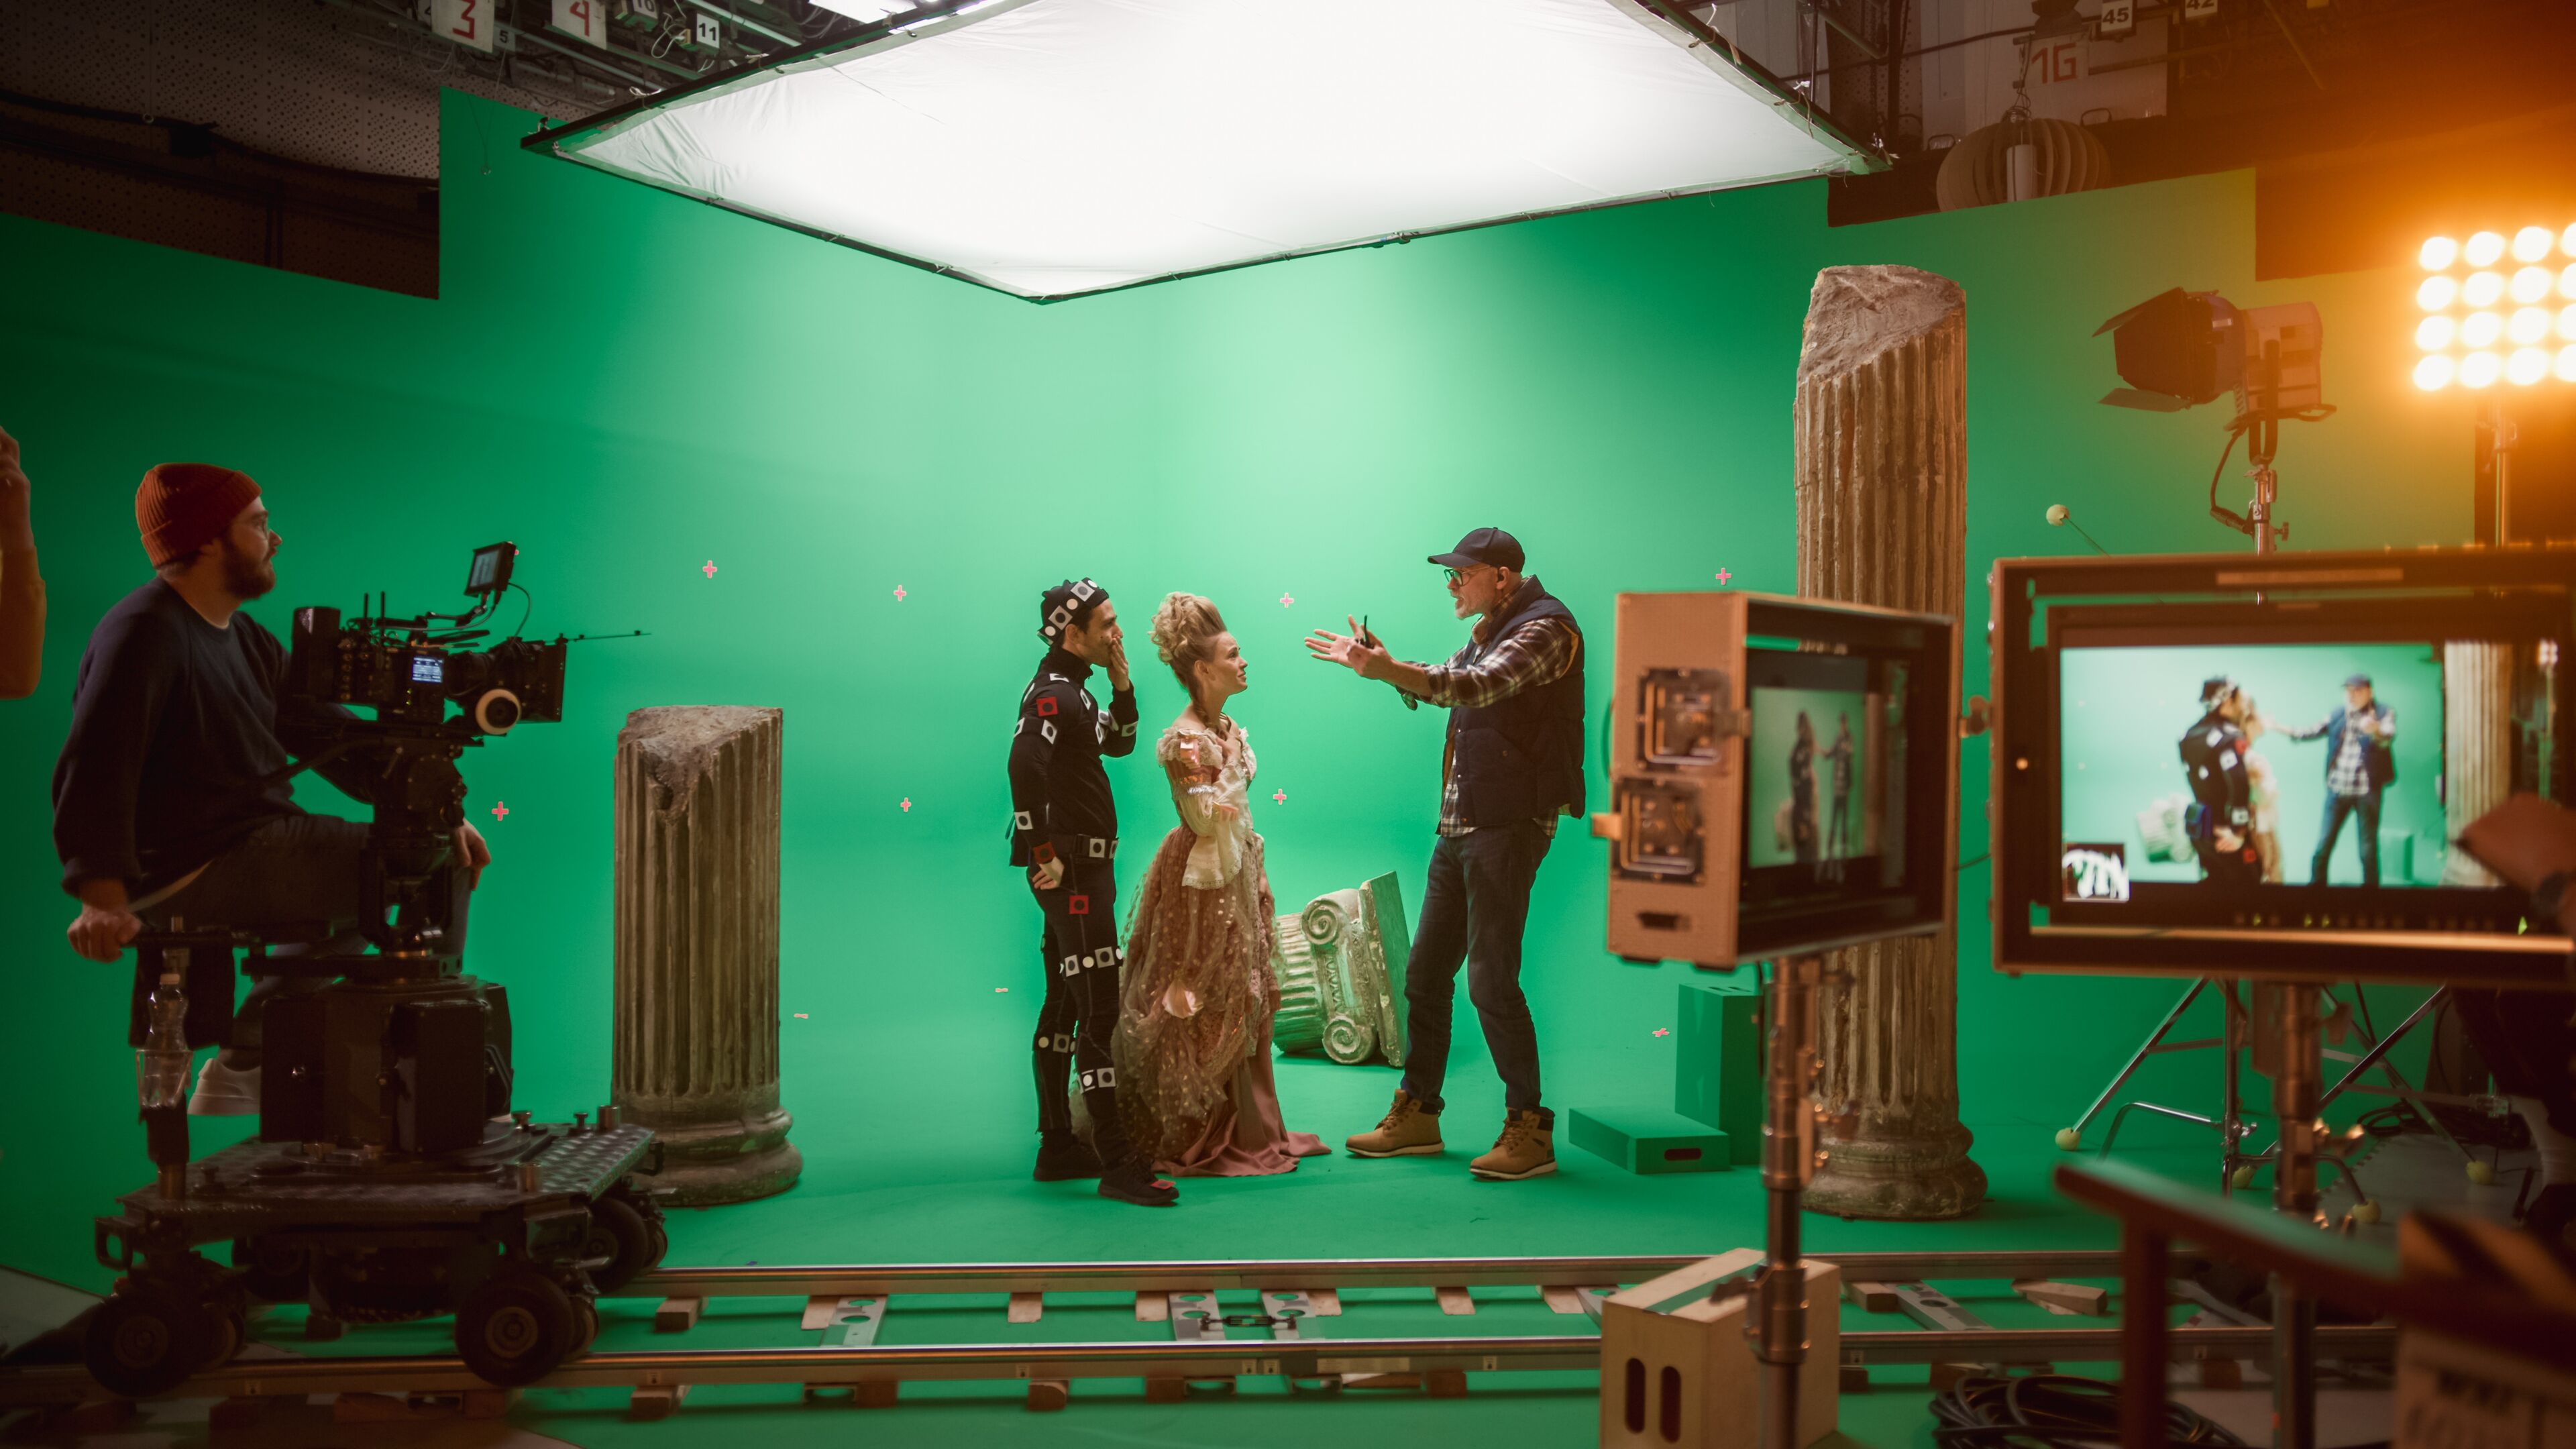 Director instructing actors in motion capture suits on a green screen set, with camera and lighting equipment.